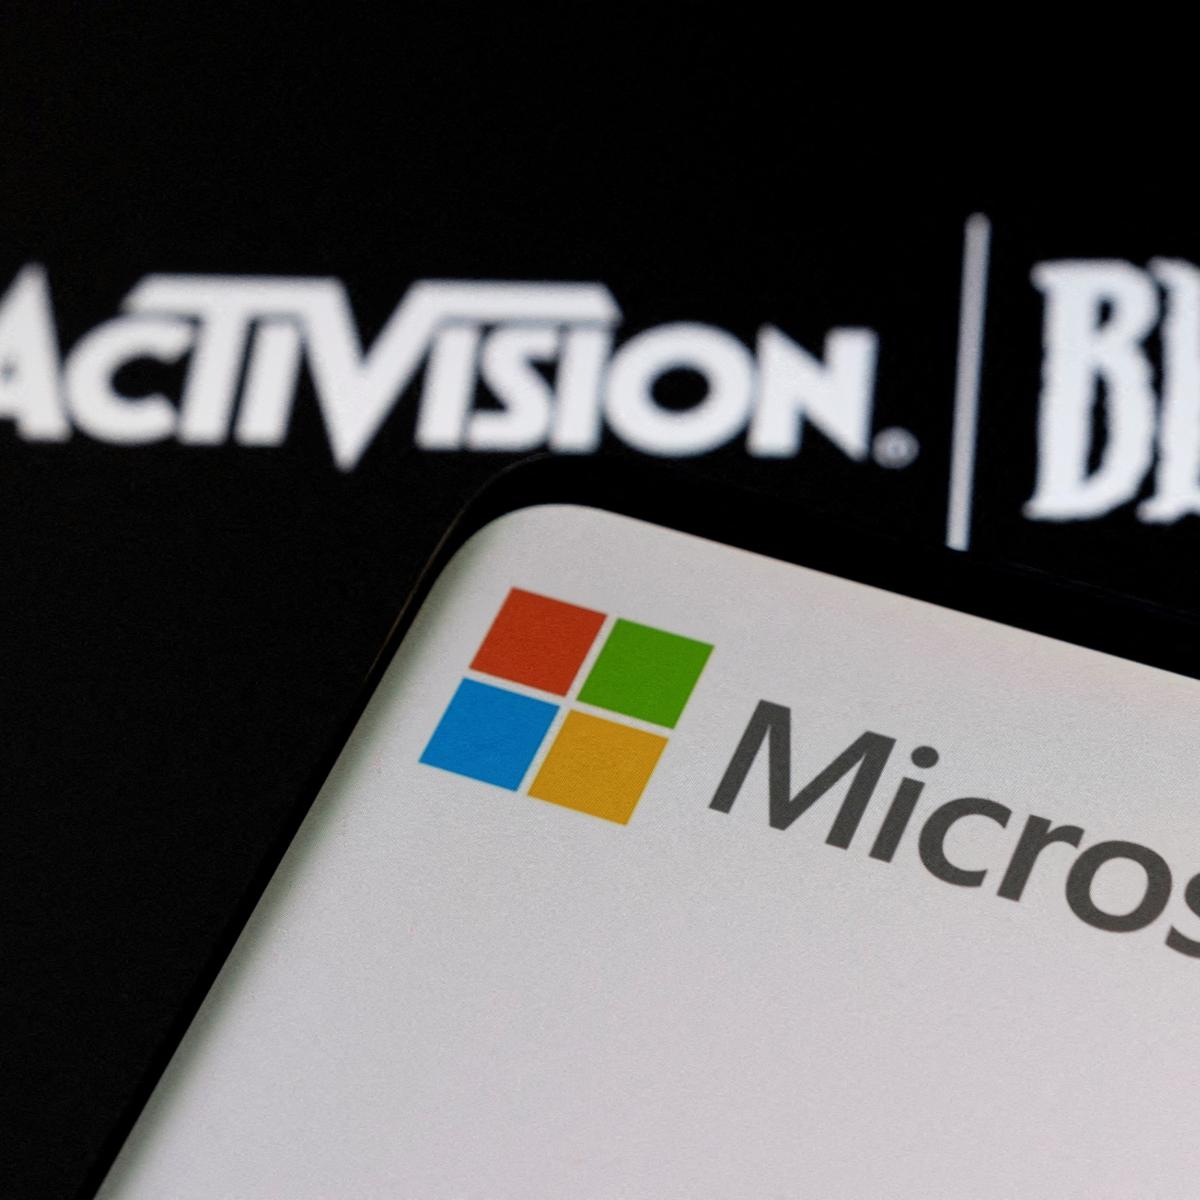 Microsoft and Activision: Questions that will decide the fate of